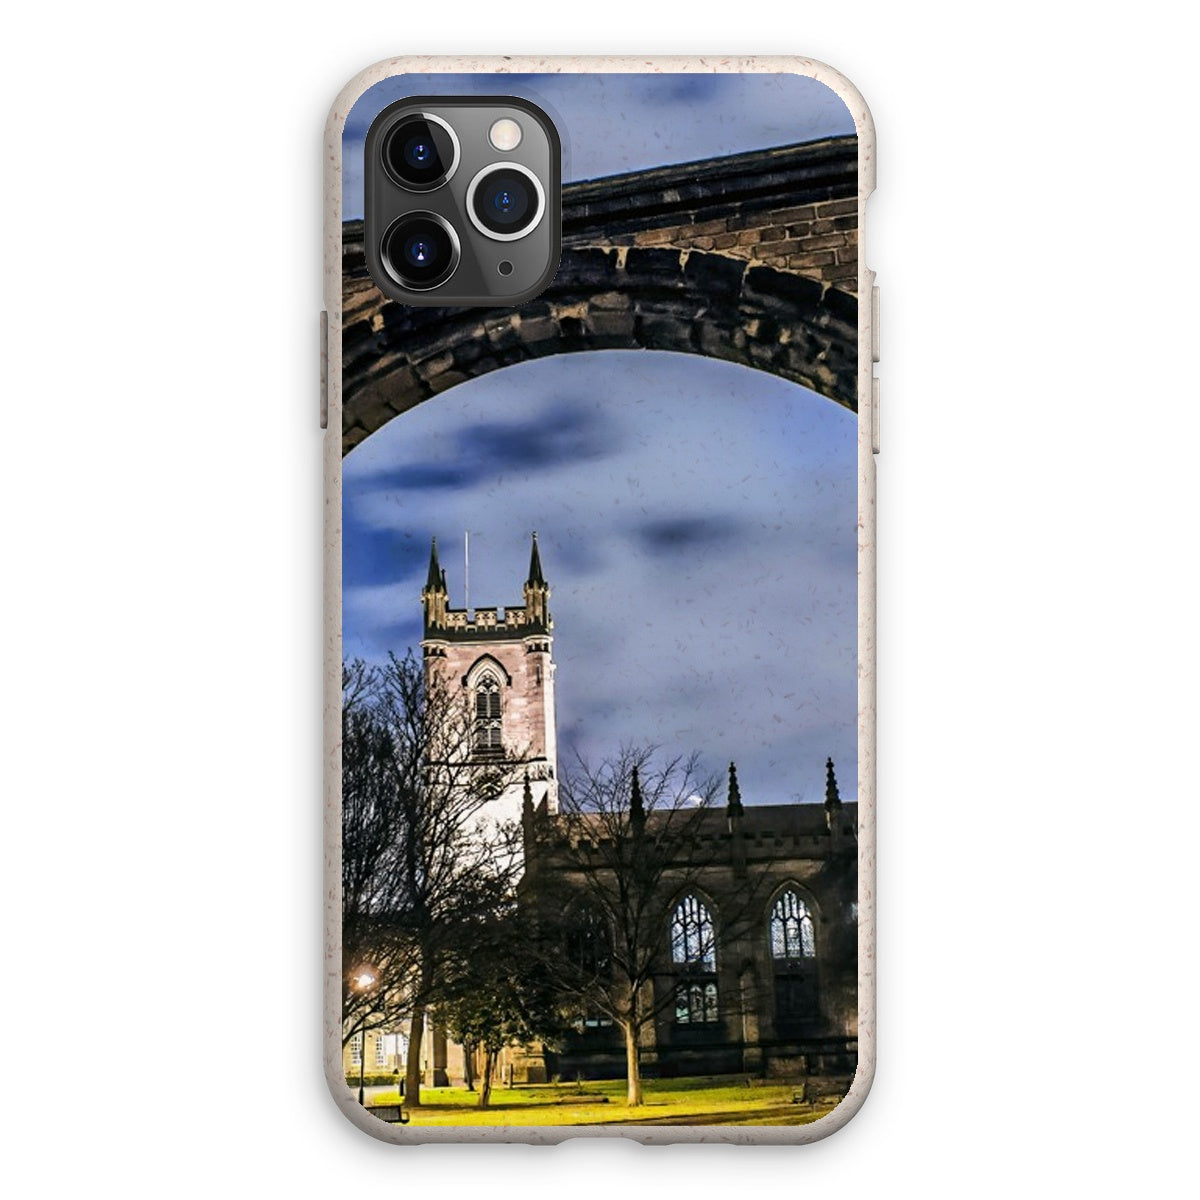 Stoke Minster at Night Eco Phone Case